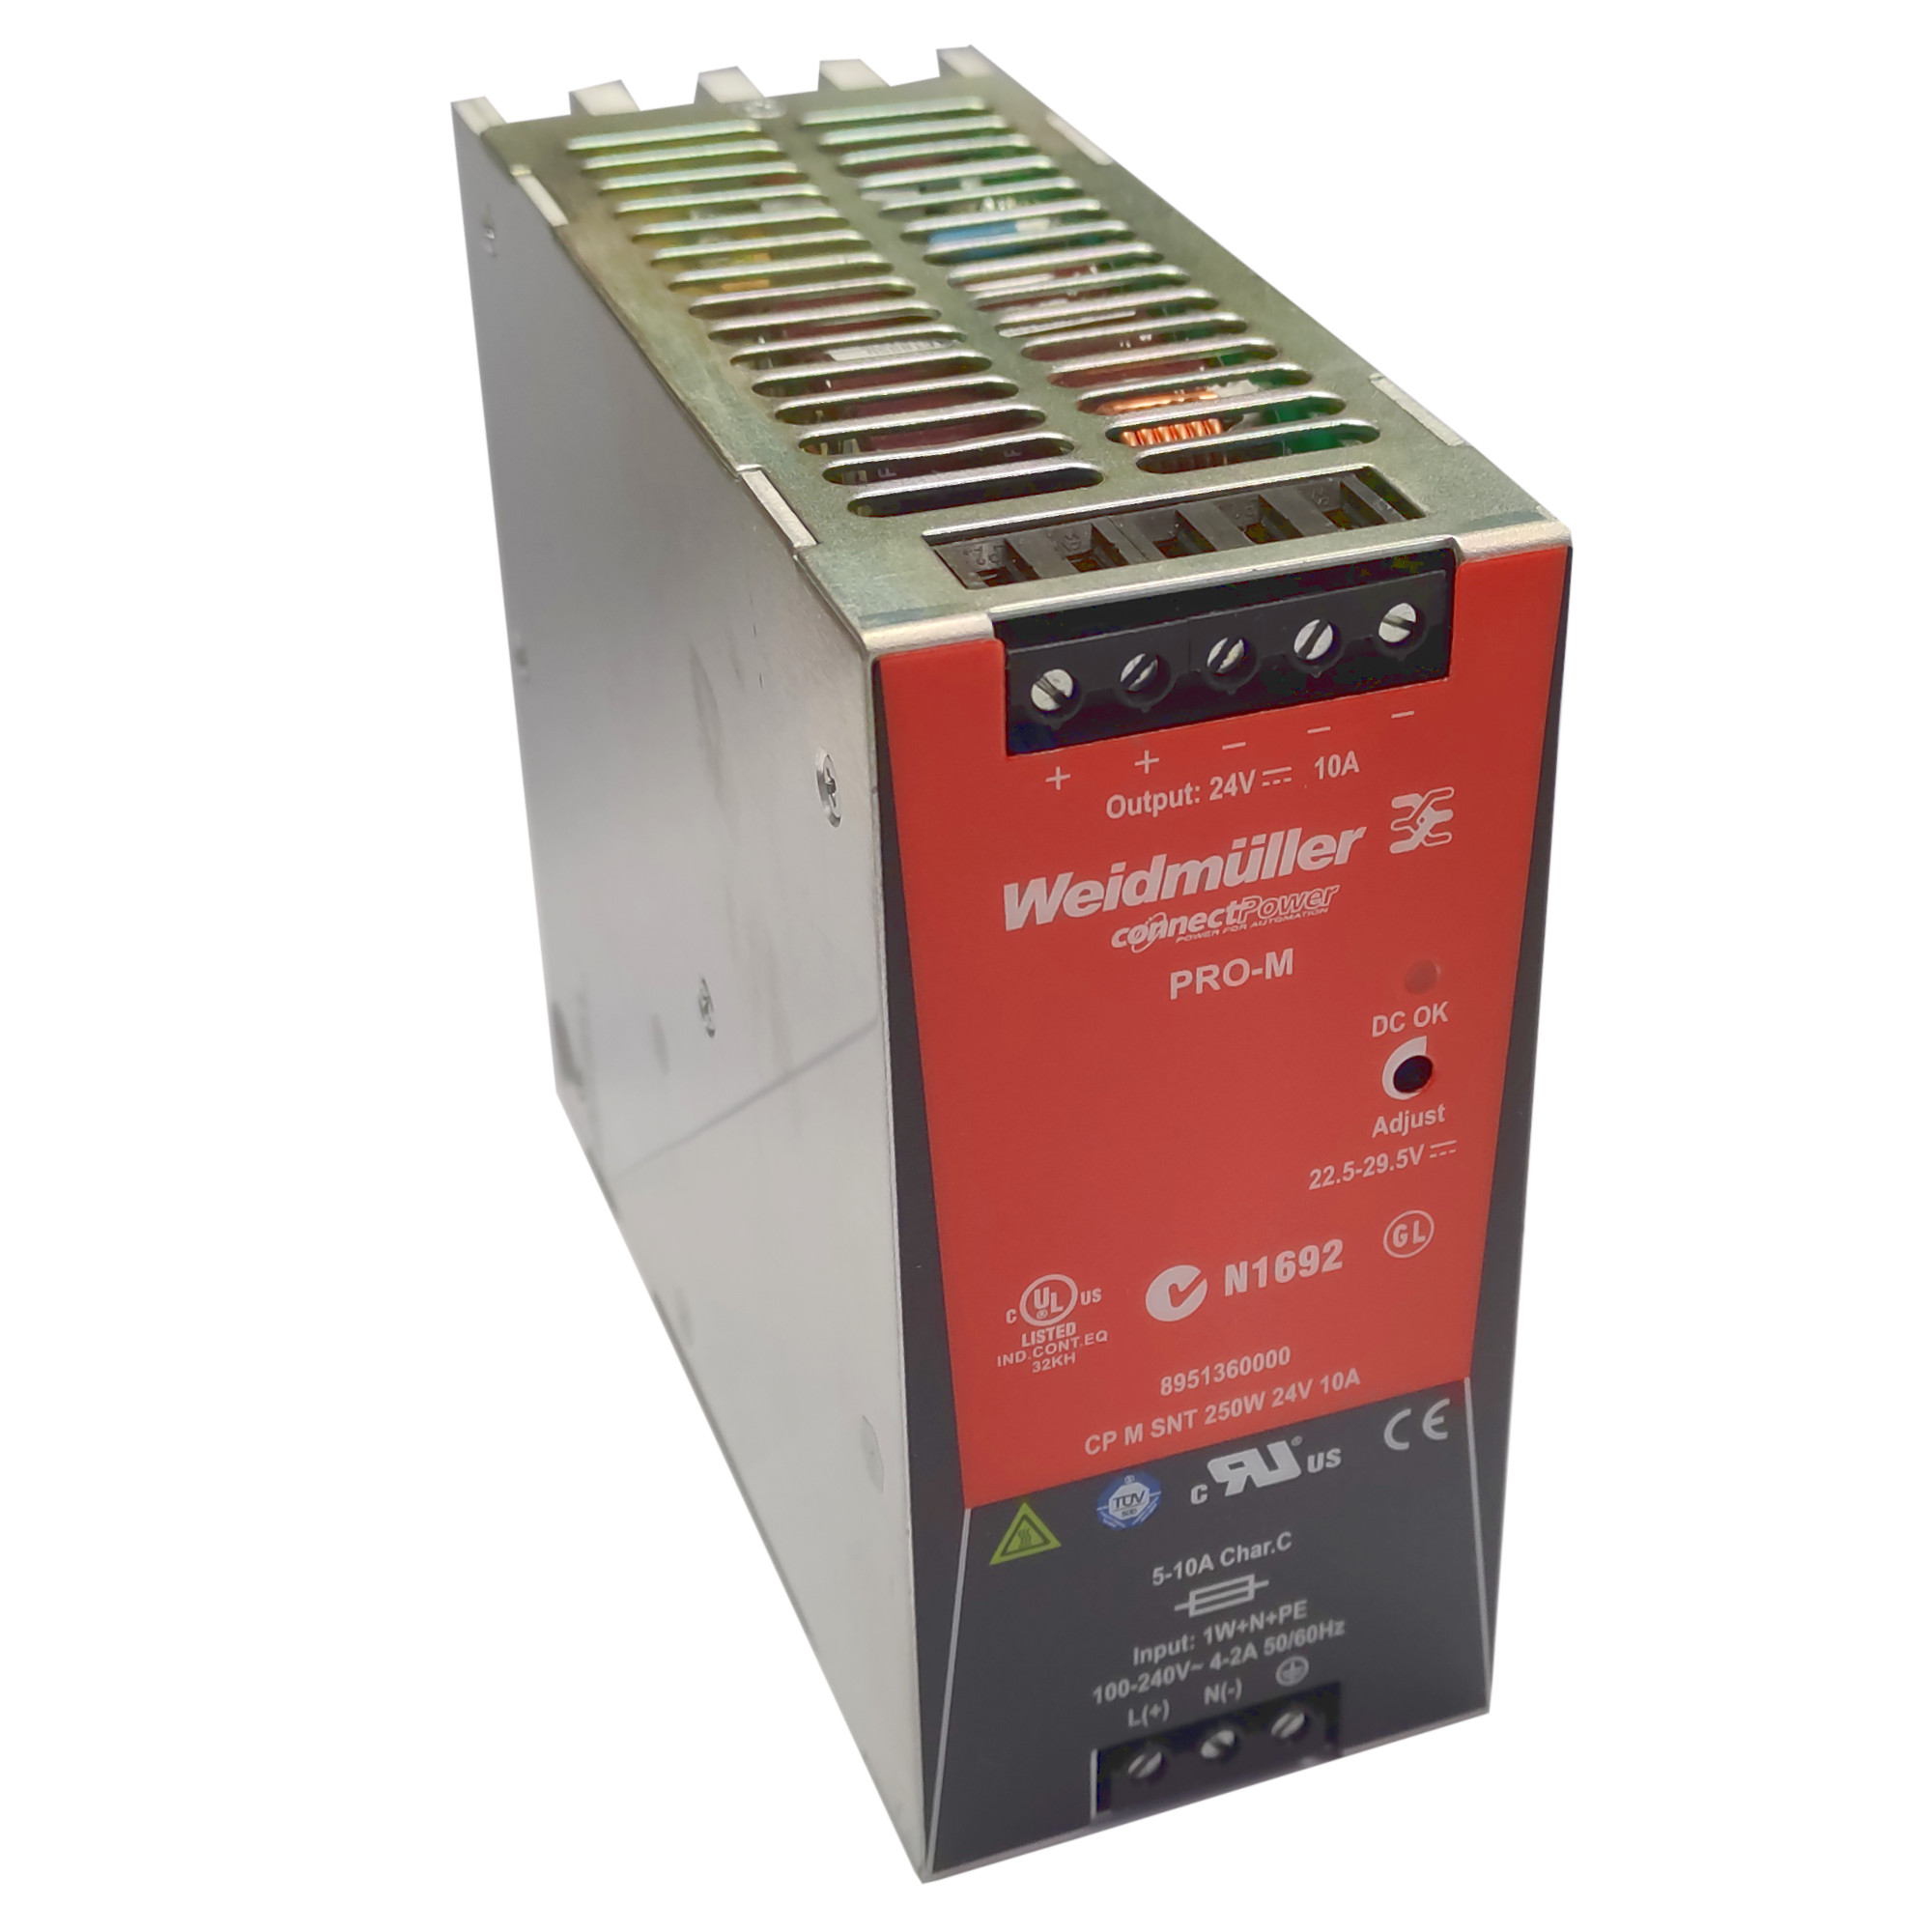 Weidmüller Power Supply CP M SNT 250W 24V 10A 8 ( 8951360000 )